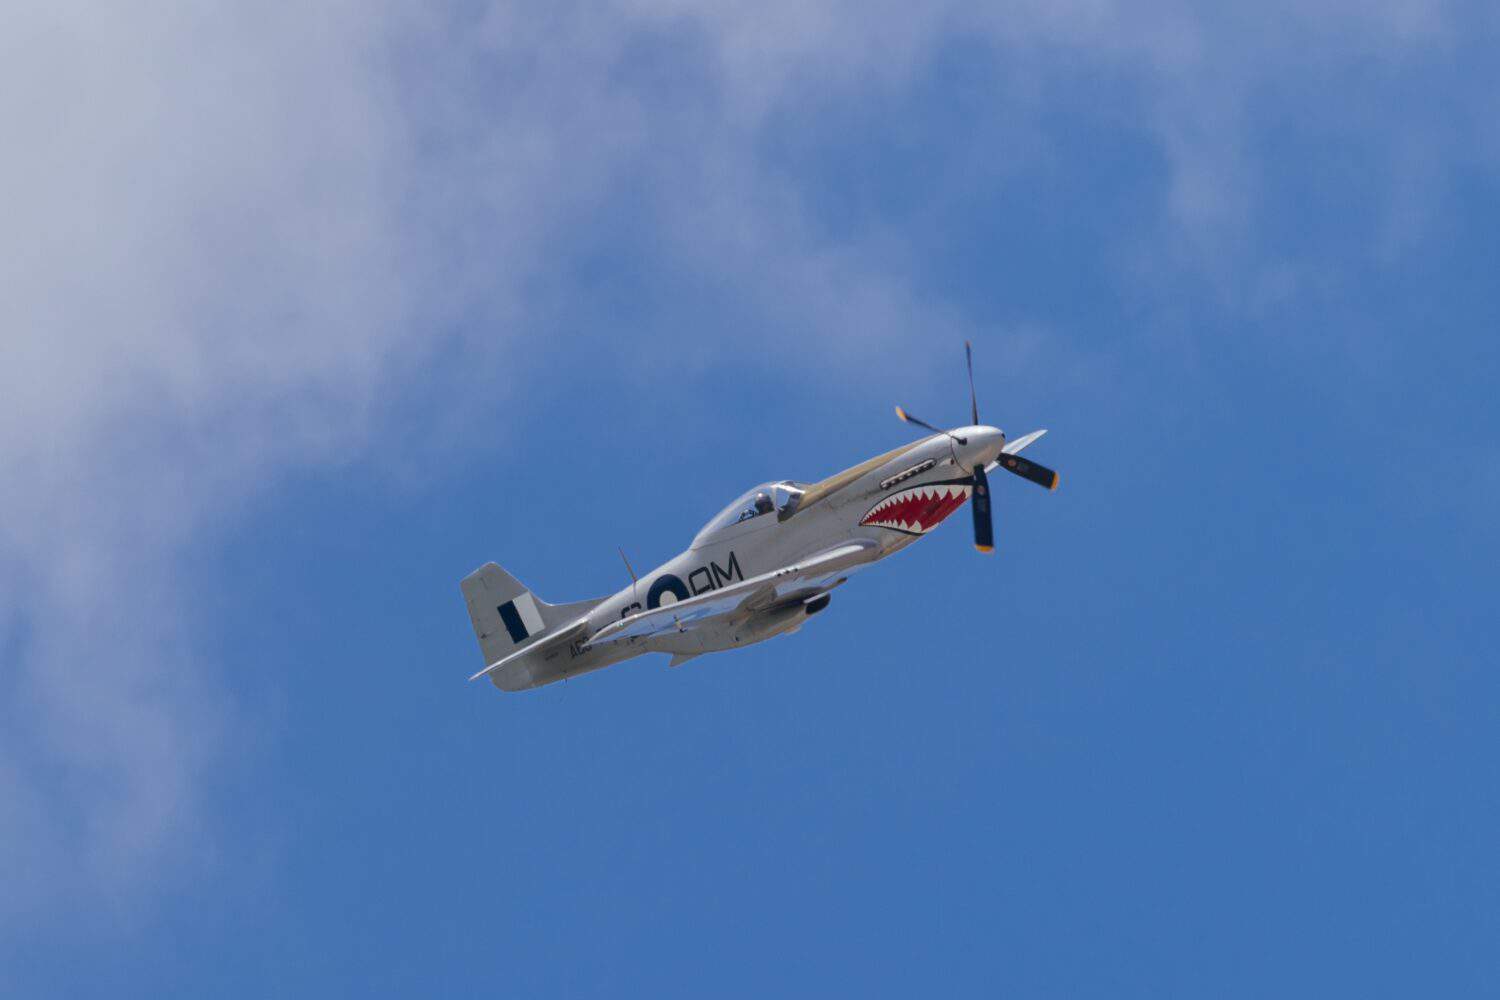 RAAF P51 Mustang VH-SVU (A68-750) doing a demonstration in Geelong, Australia for Australia day on January 26th, 2024